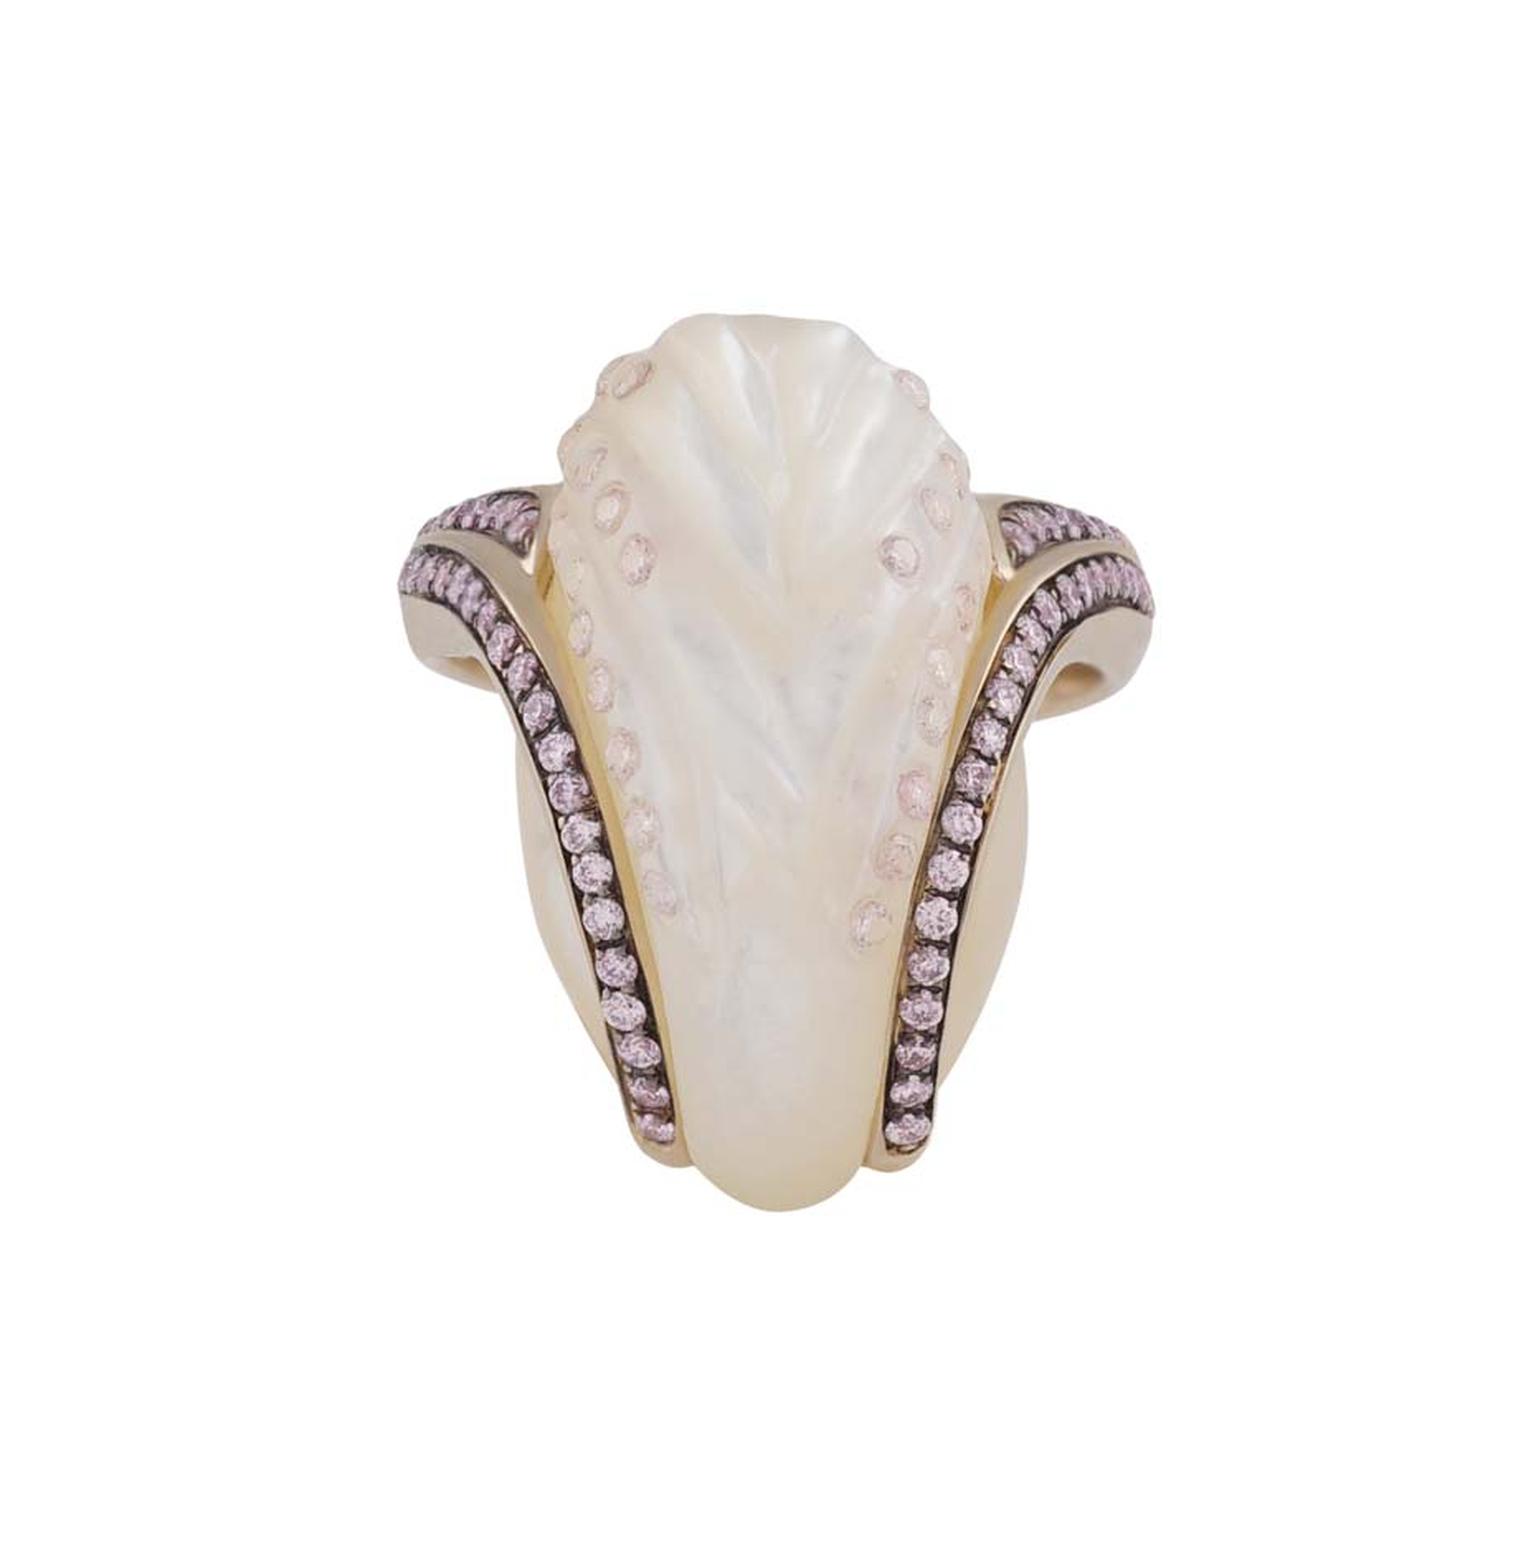 Noor Fares ring from the Fly Me to the Moon collection featuring a carved white mother-of-pearl stone and pale pink diamonds in grey gold.